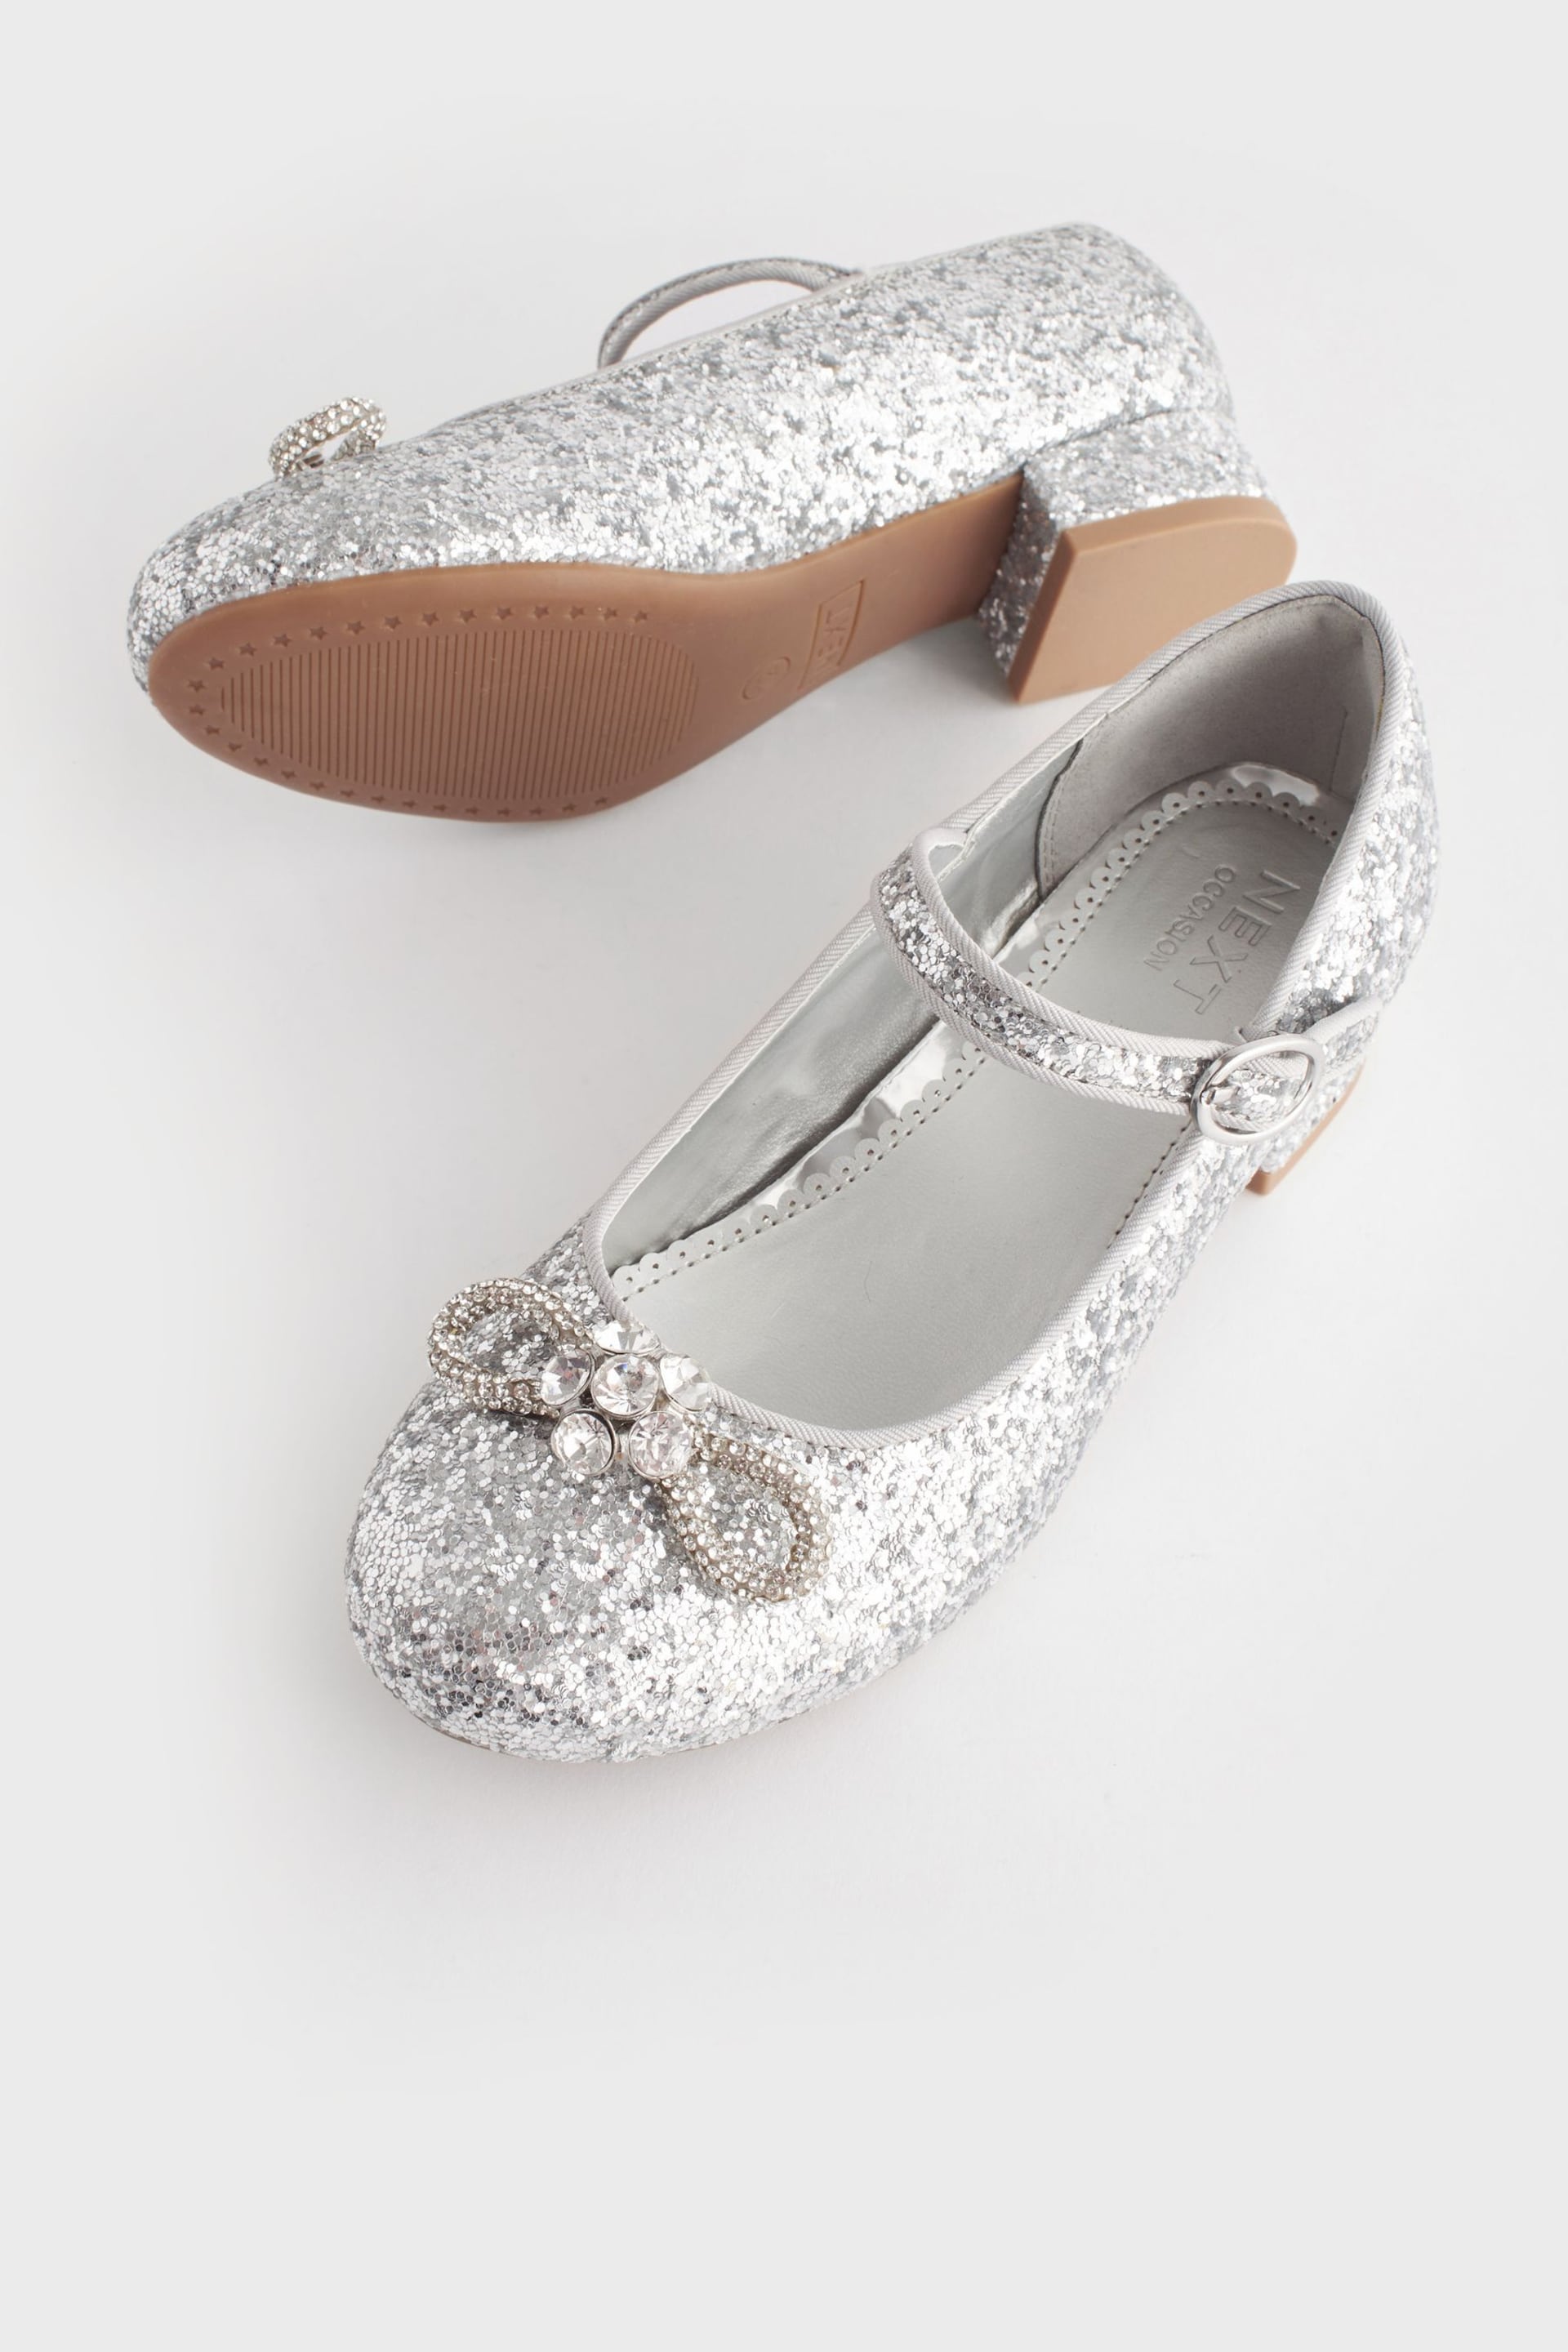 Silver Glitter Bow Mary Jane Occasion Heel Shoes - Image 4 of 5